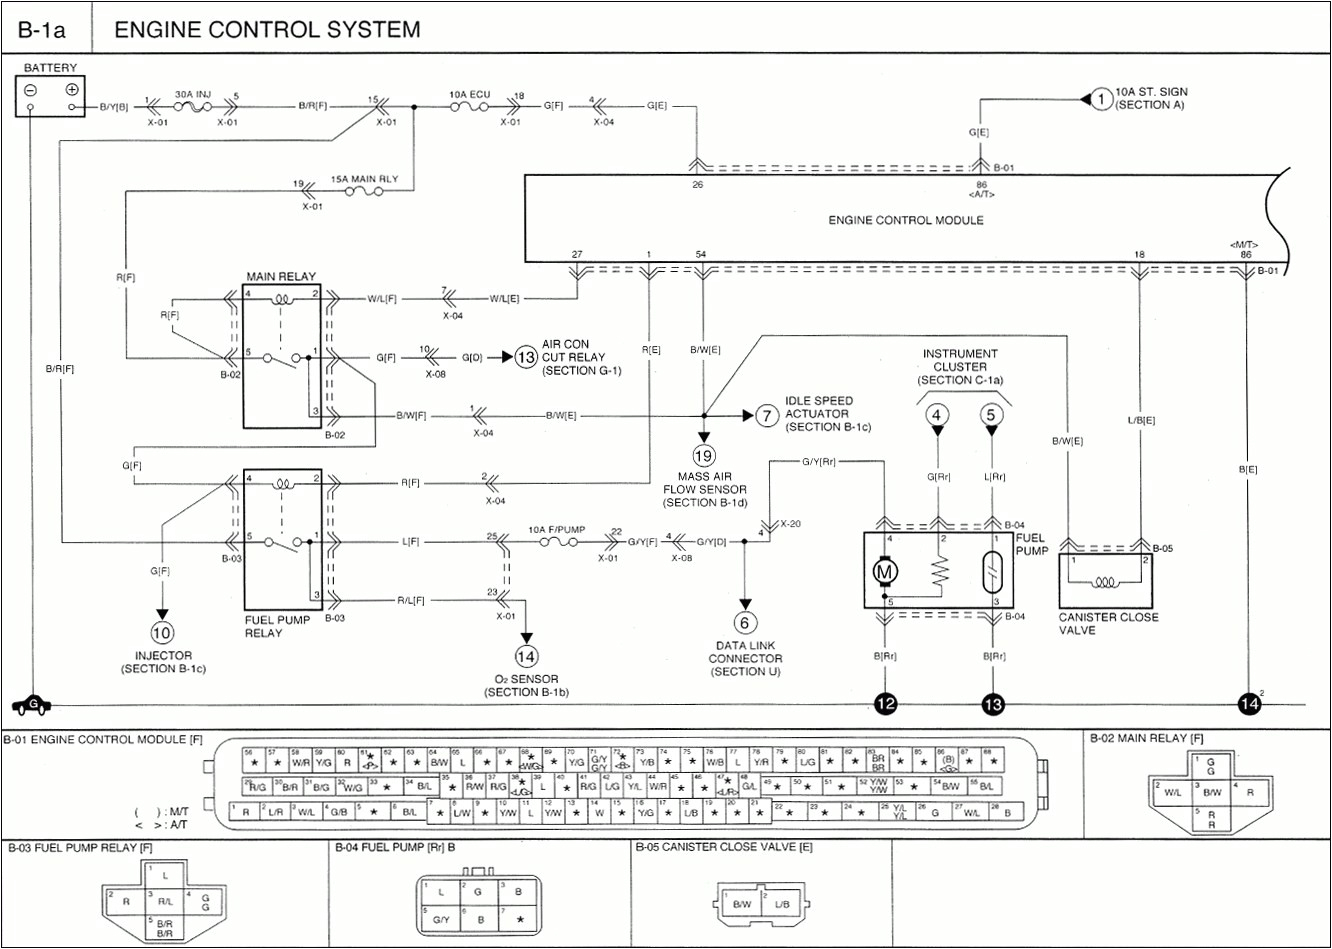 pilz safety relay wiring diagram simple wiring diagram opto 22 relay wiring diagram pilz relay wiring